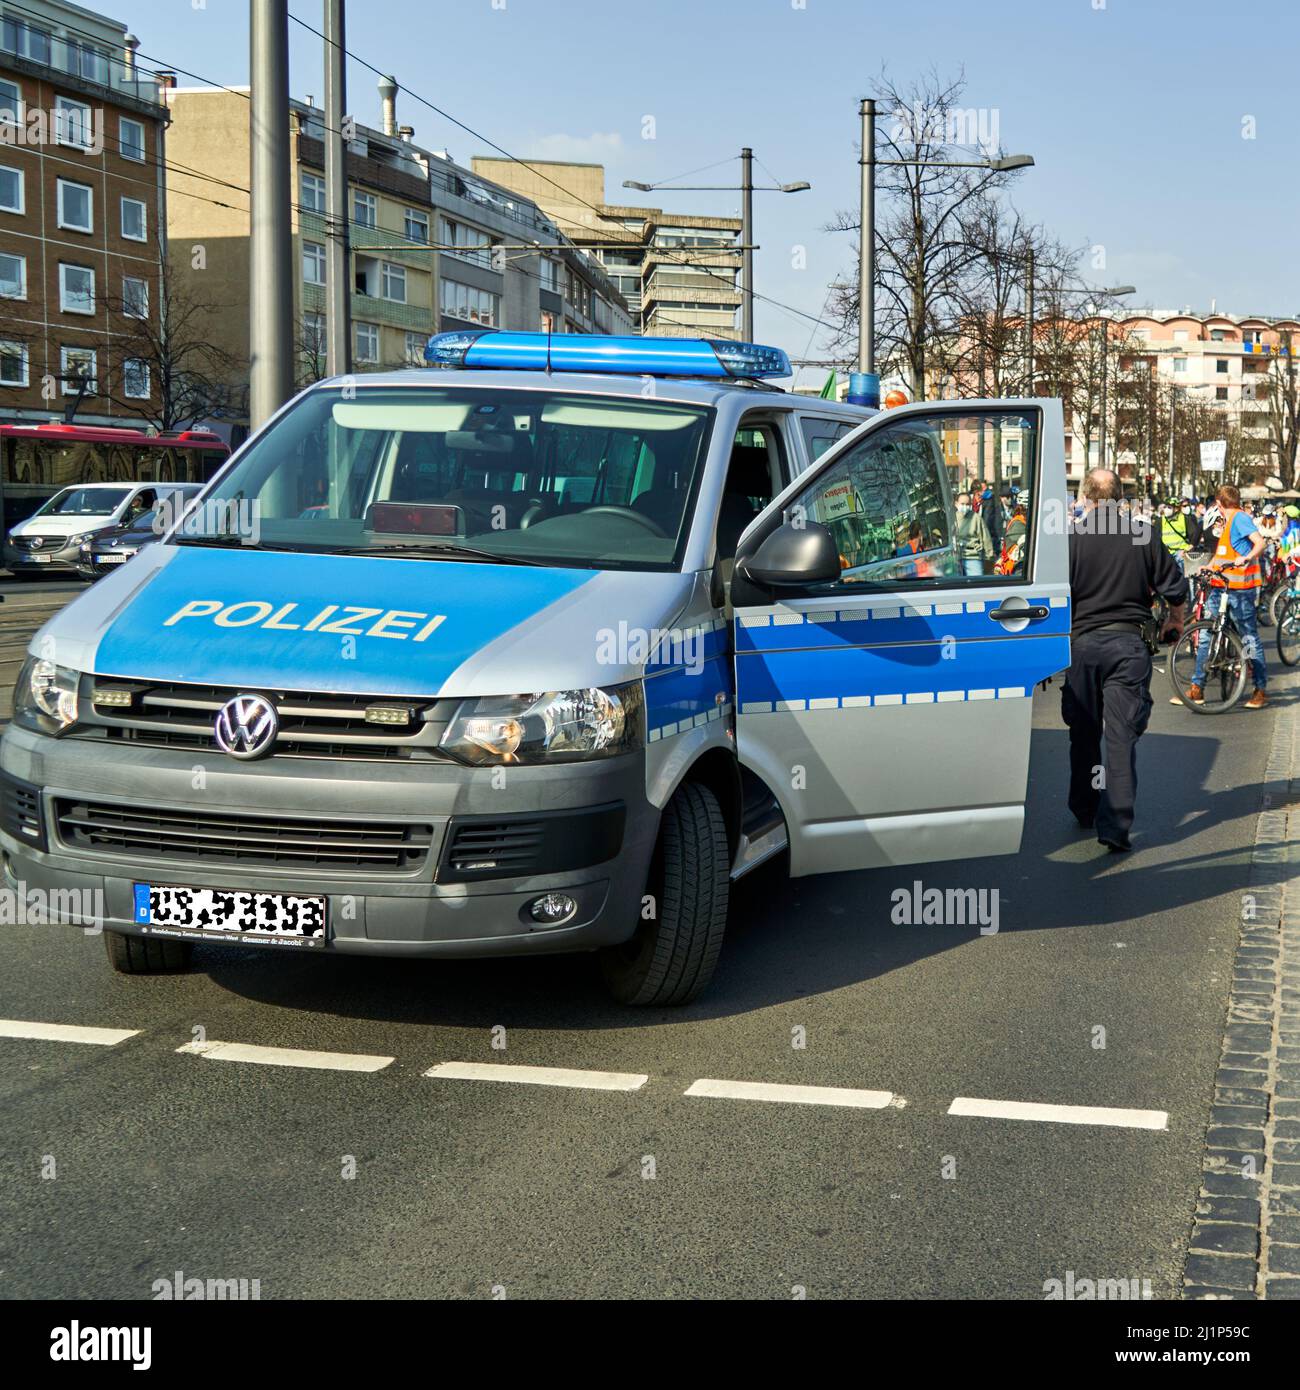 Braunschweig, Germany, March 25, 2022: German police car, VW bus and van, with open driver's door and blue light on Stock Photo